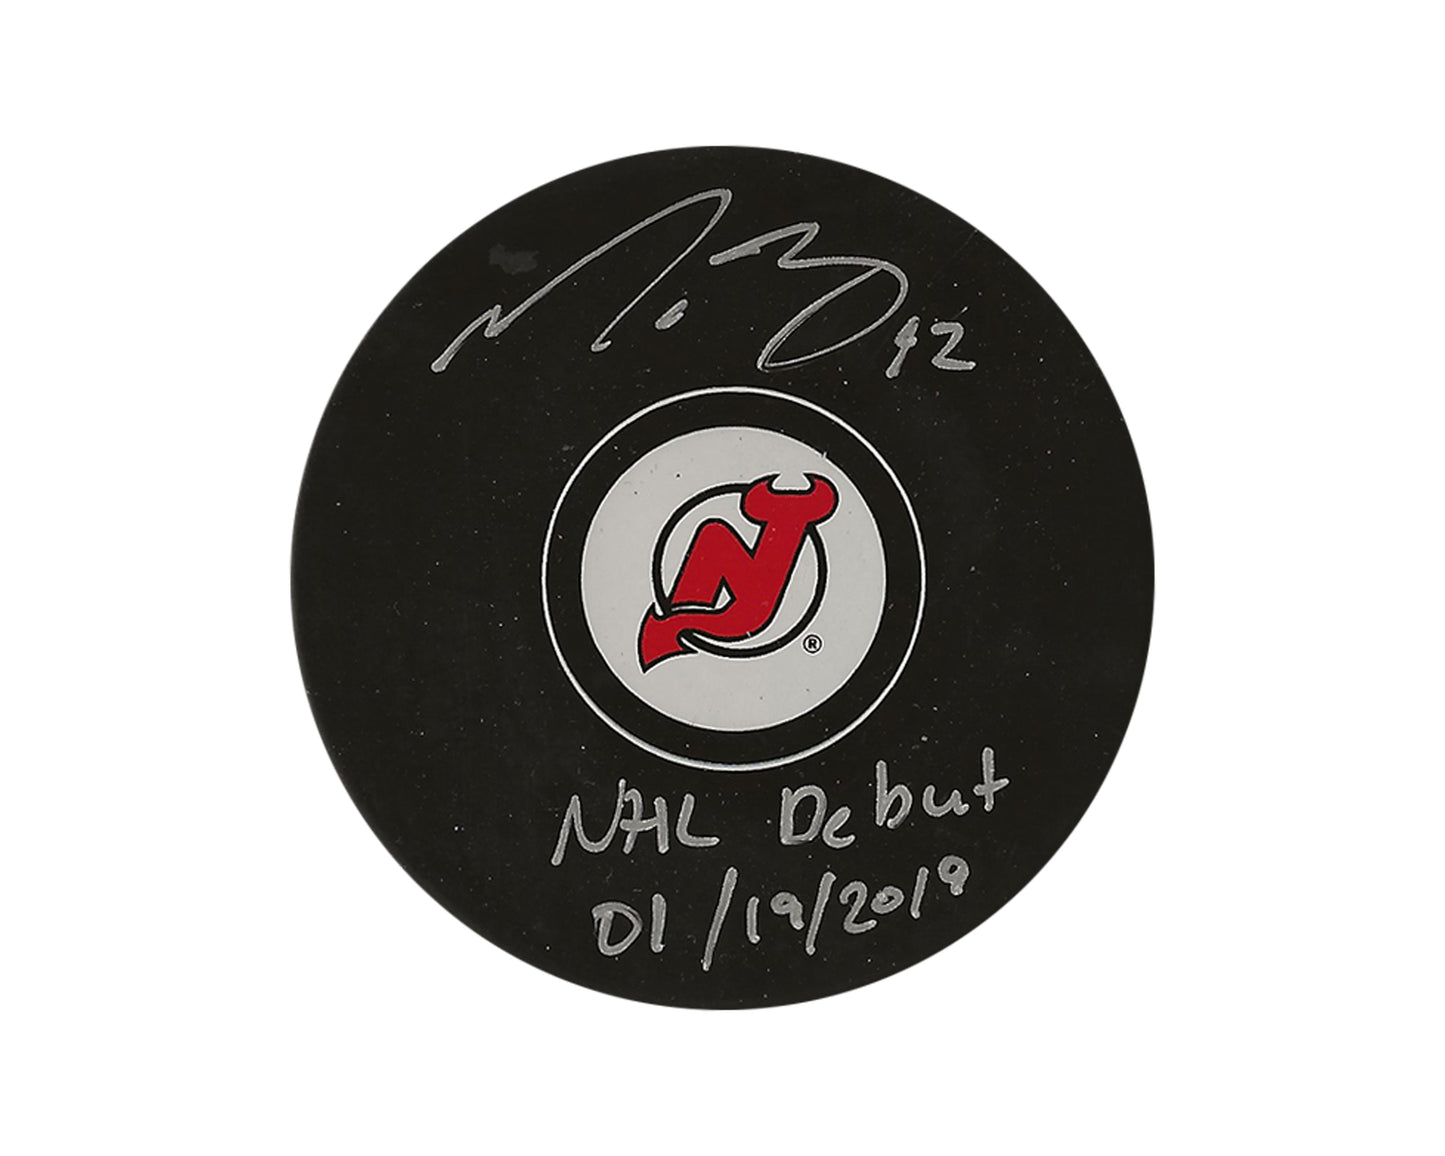 Nathan Bastian Autographed New Jersey Devils Autograph Model Puck Inscribed "NHL Debut 01/19/2019"